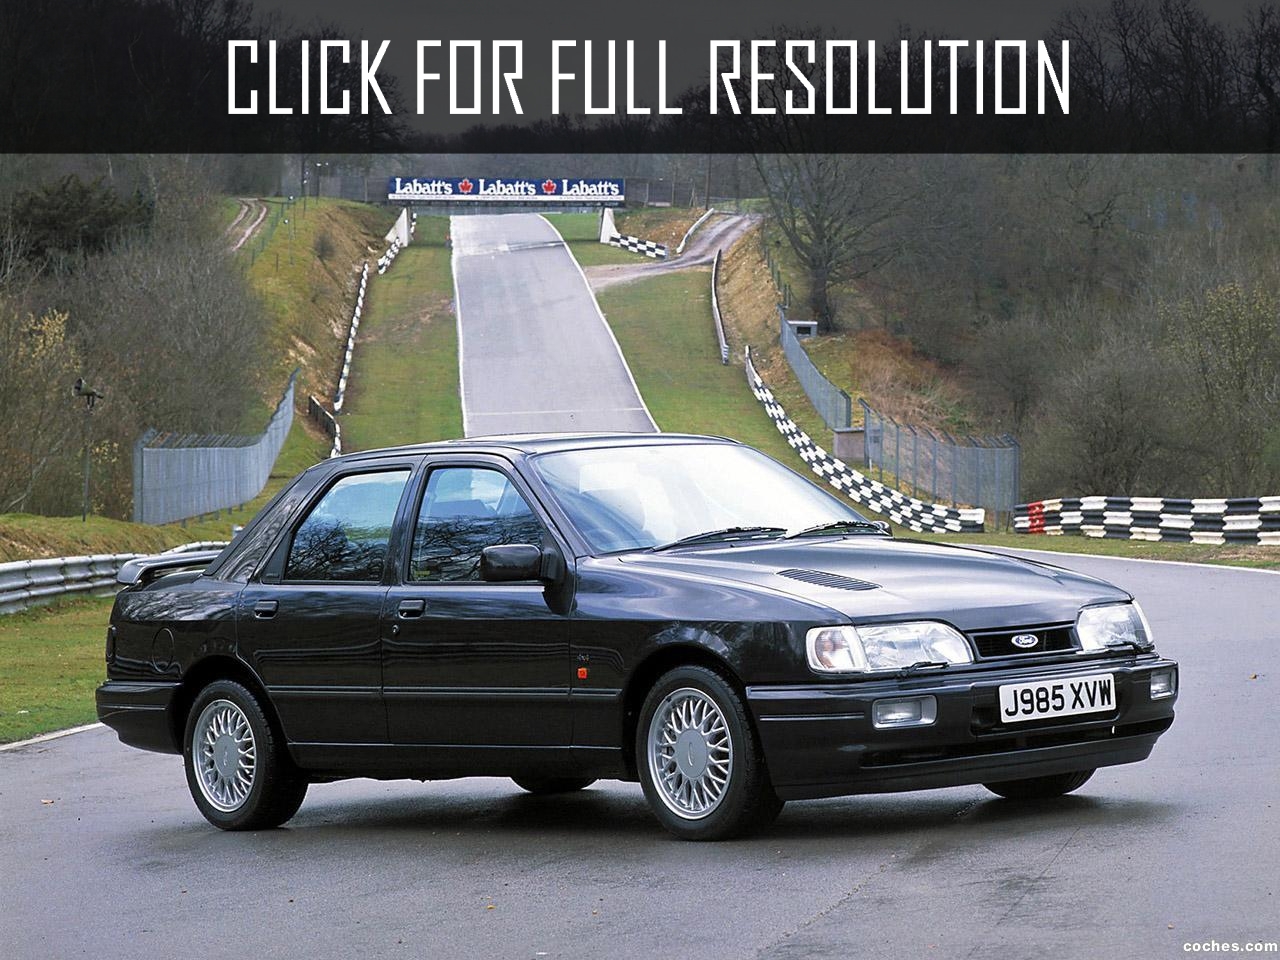 Ford Sierra Rs Cosworth 4x4